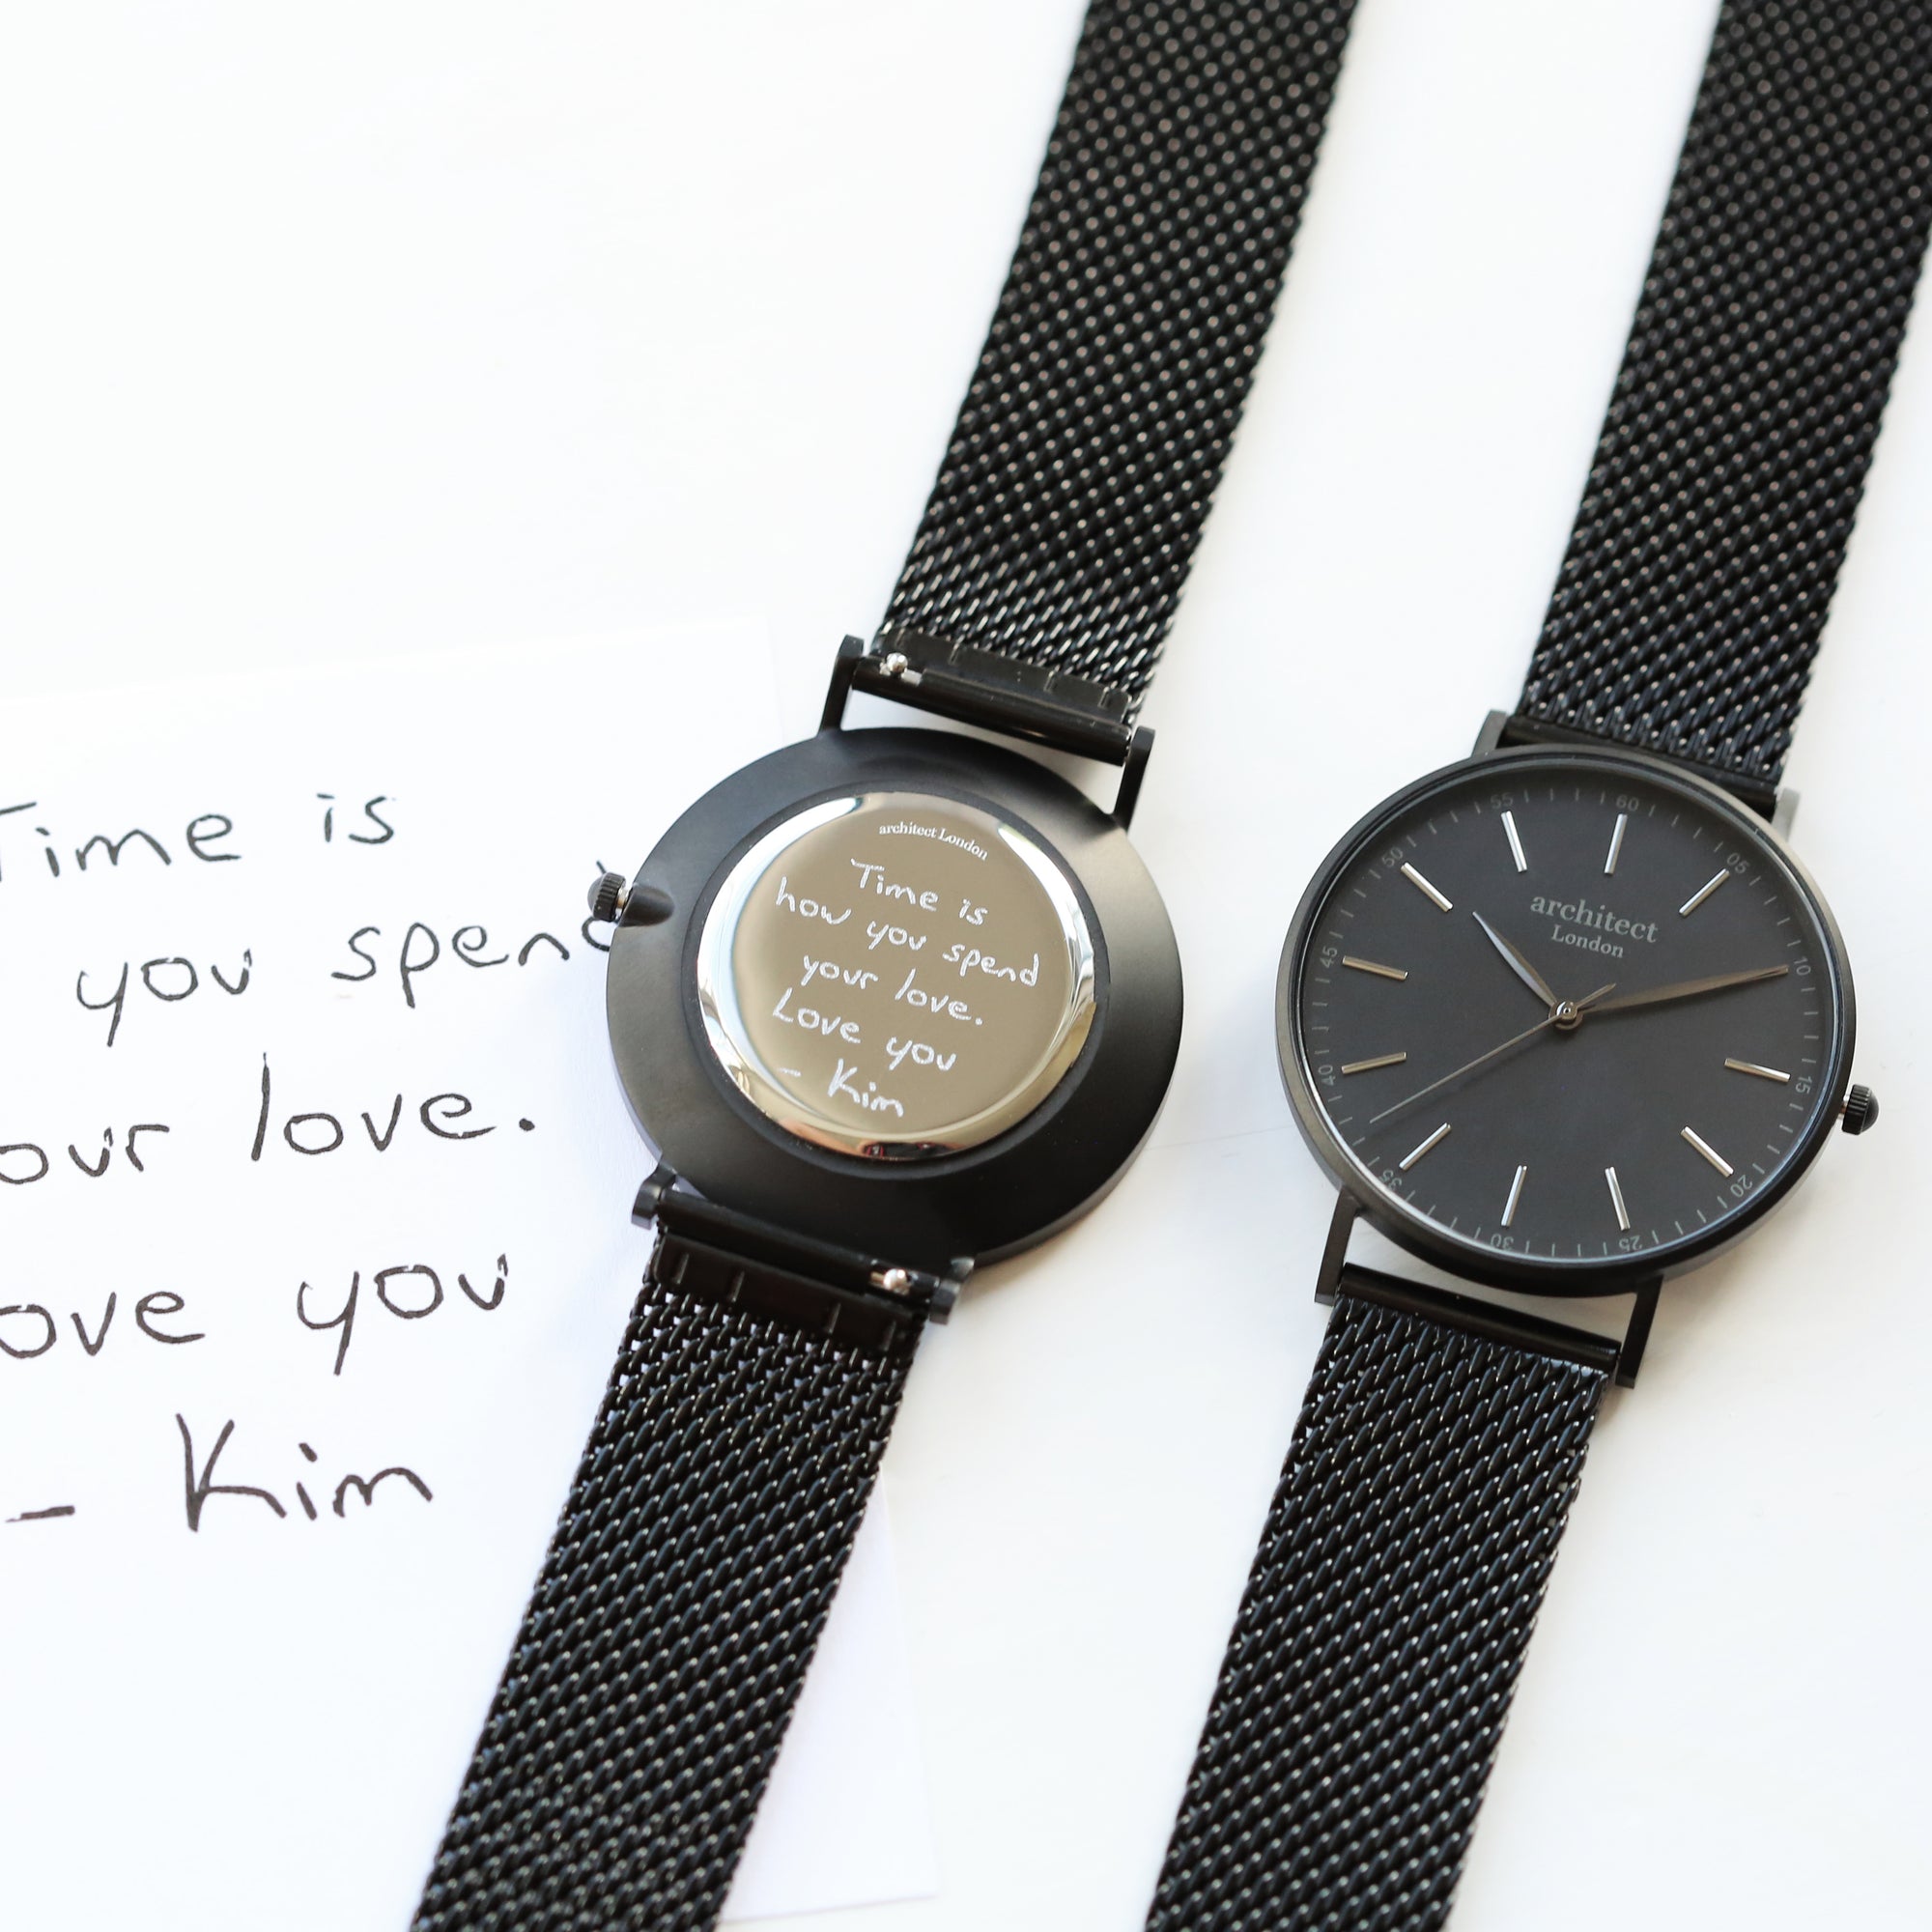 Front and rear image of a men's watch that can be engraved on the back with your own handwriting. The watch is made by Architect London and has a large black face and a black stainless steel mesh strap. The rear of the watch can be engraved with your message written in your own handwriting.